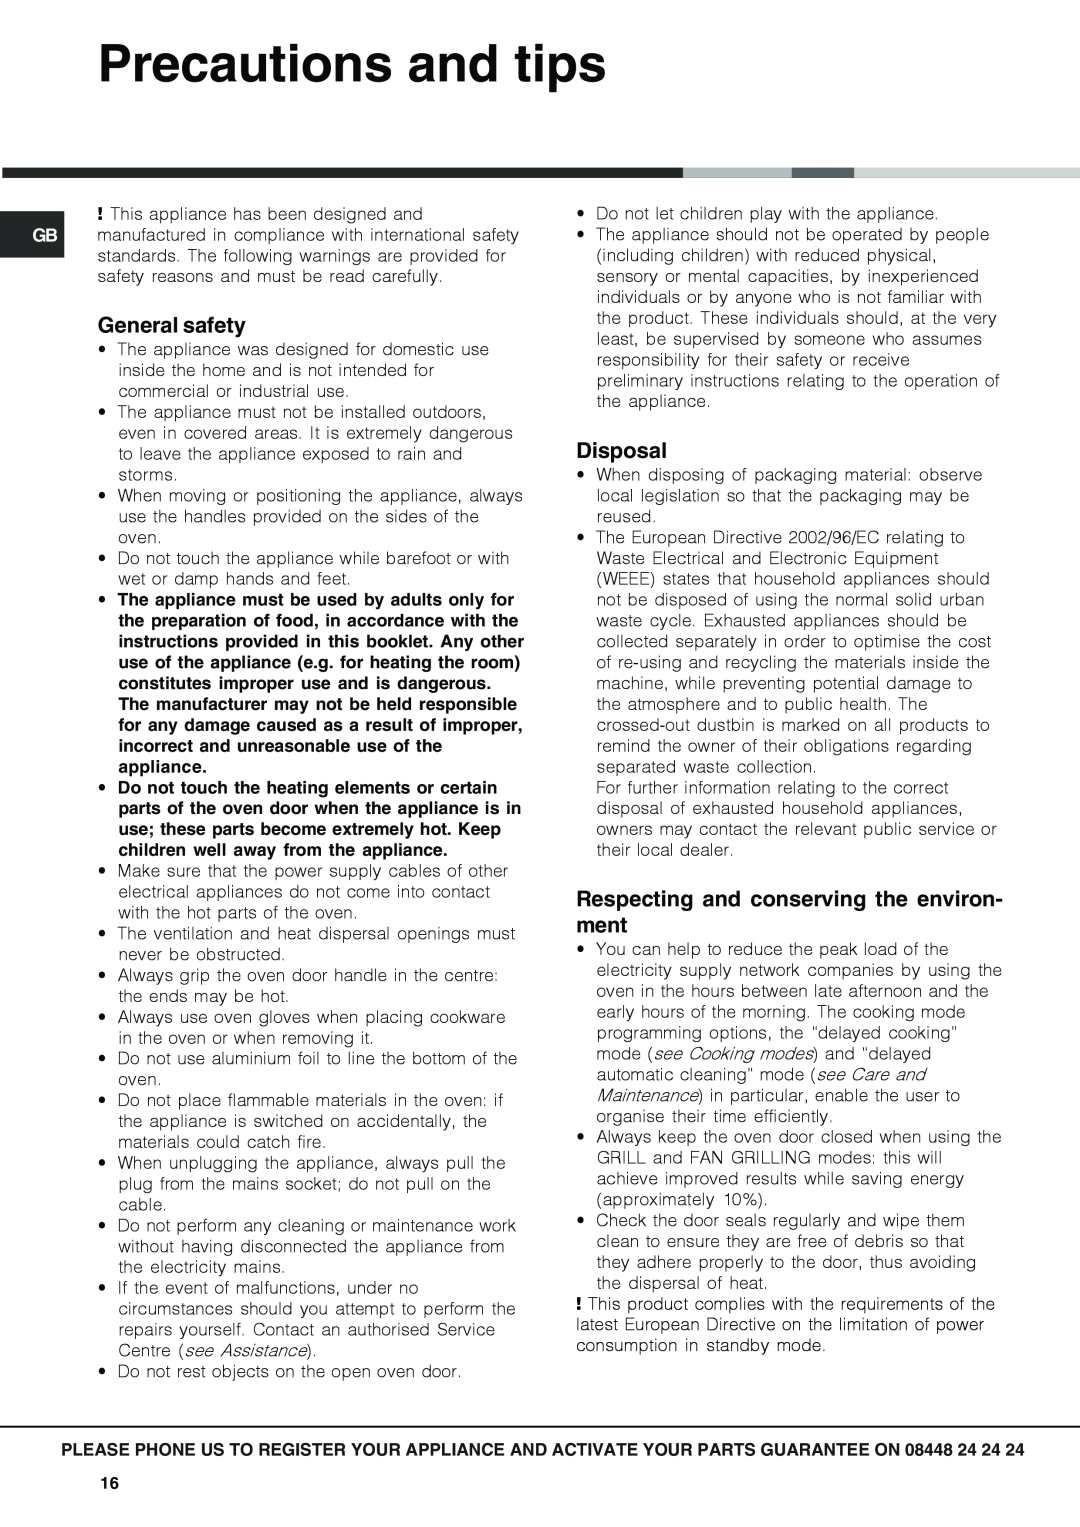 Hotpoint OSX 1036N D CX manual Precautions and tips, General safety, Disposal, Respecting and conserving the environ- ment 